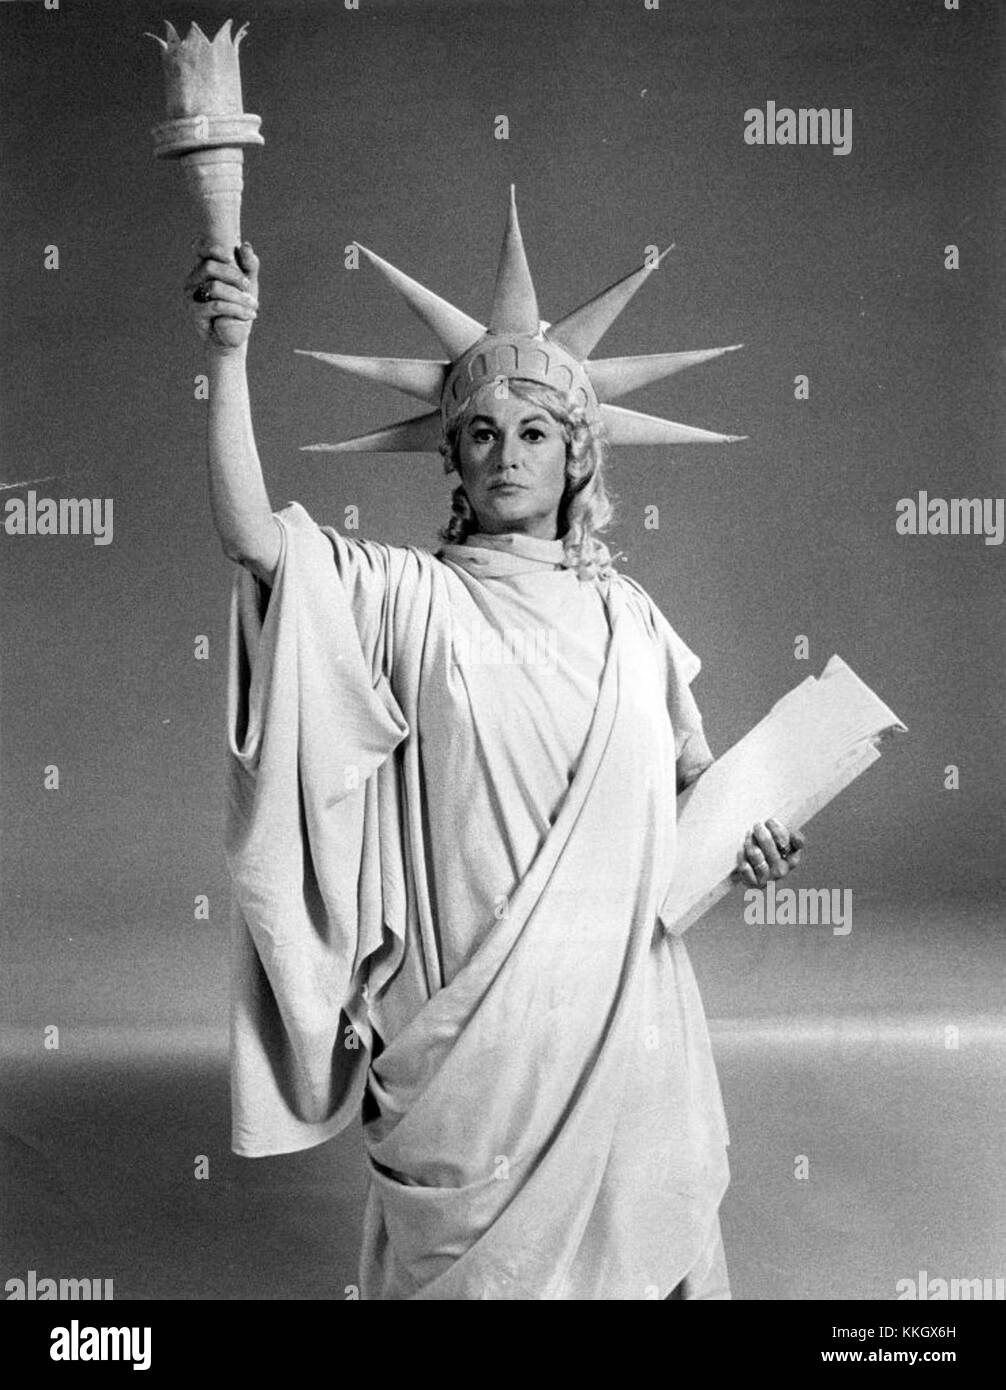 Subjects: Beatrice Arthur Program: 'Maude' On Air: Tuesday, Nov. 13, 8:00-8:30 PM, EST Bea Arthur turns into the Statue of Liberty in the hilarious musical production that take over Maude in the show being repeated at 7:30 tonight on Channel 7. Jan Leighton portrays George Washington who will receive a fictional 'roasting' on the Dean Martin Show at 10 tonight, Channel 5. If the Maude episode that C.B.S. Is showing at 8 tonight on Channel 7 doesn't win an Emmy as the funniest comedy episode of the season, then there isn't any justice. Maude Bea Arthur 1973 Stock Photo